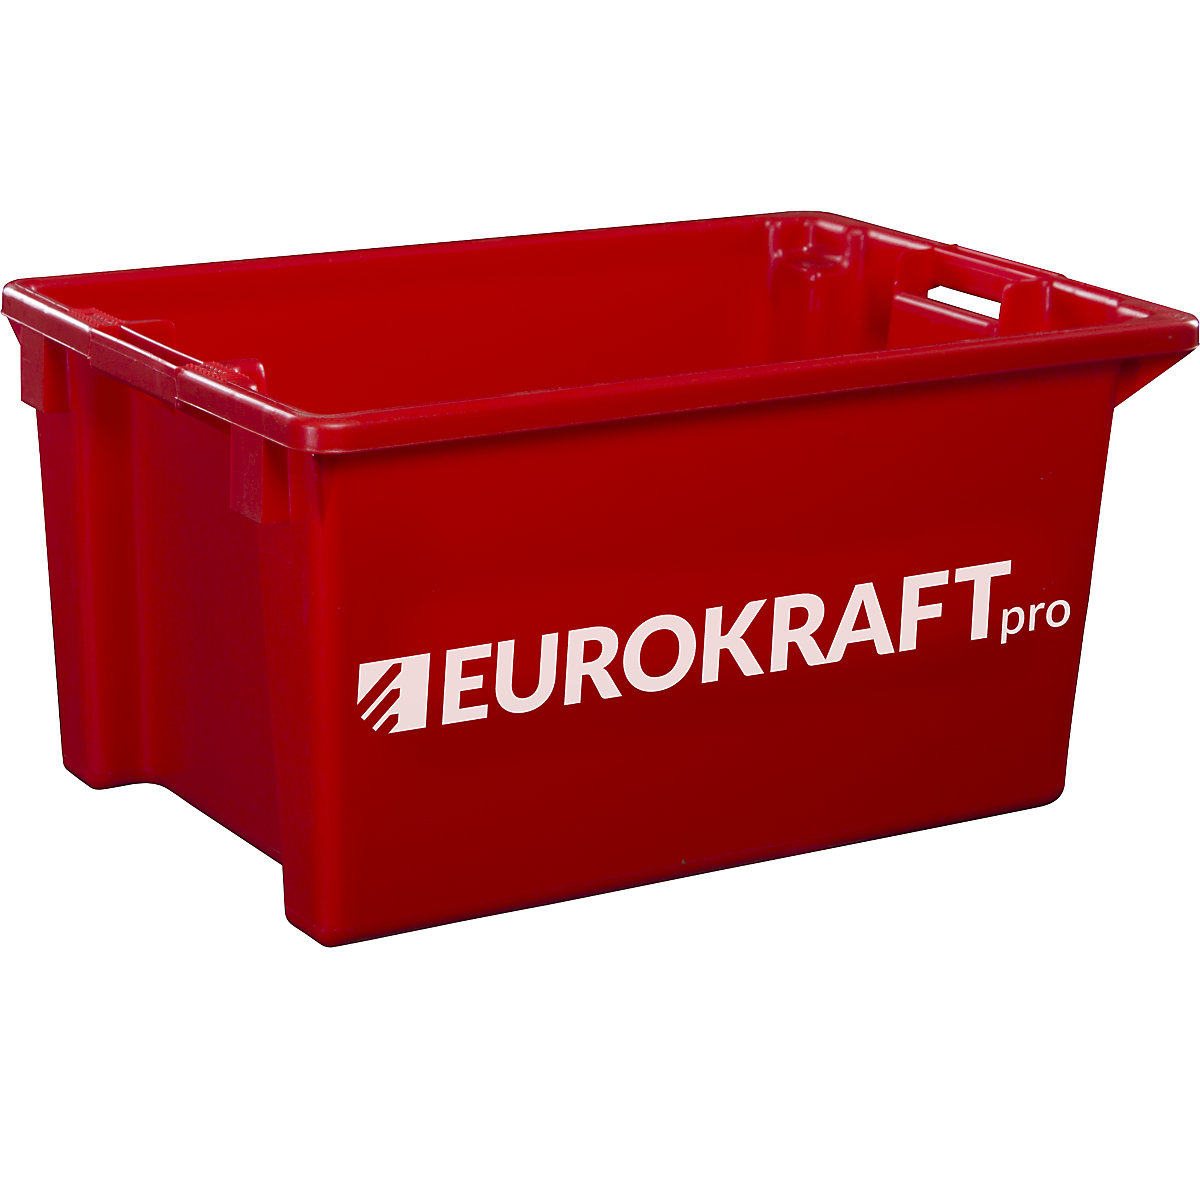 Stack/nest container made of polypropylene suitable for foodstuffs – eurokraft pro, capacity 70 l, pack of 2, solid walls and base, red